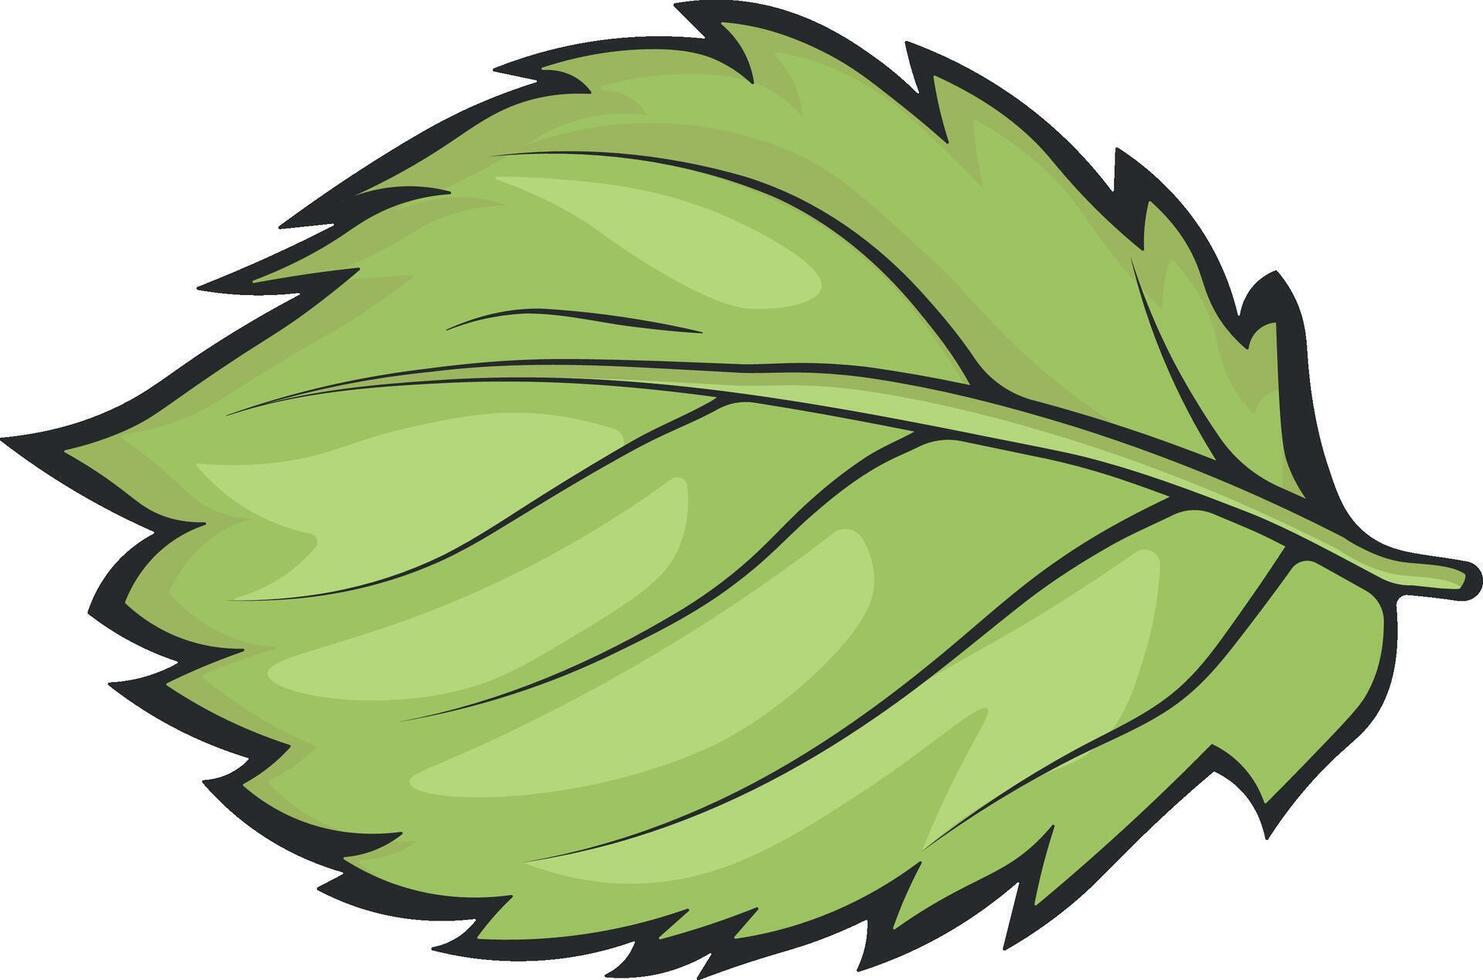 green leaf vector without background